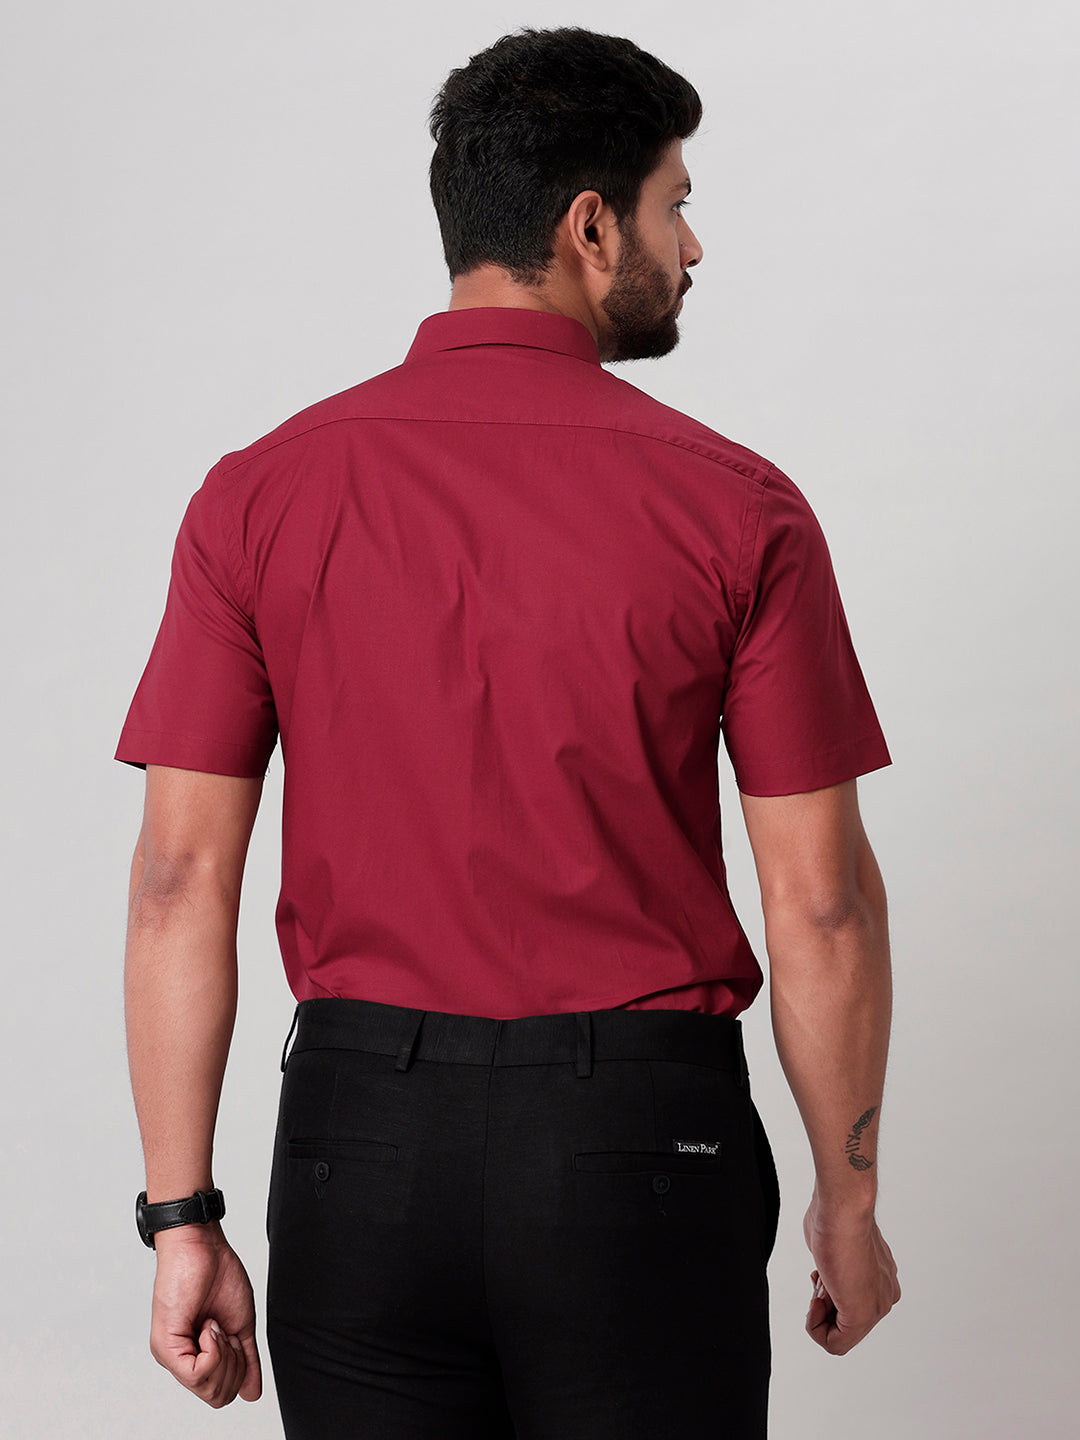 Mens Formal Cotton Spandex 2 Way Stretch Maroon Half Sleeves Shirt LY6-Back view